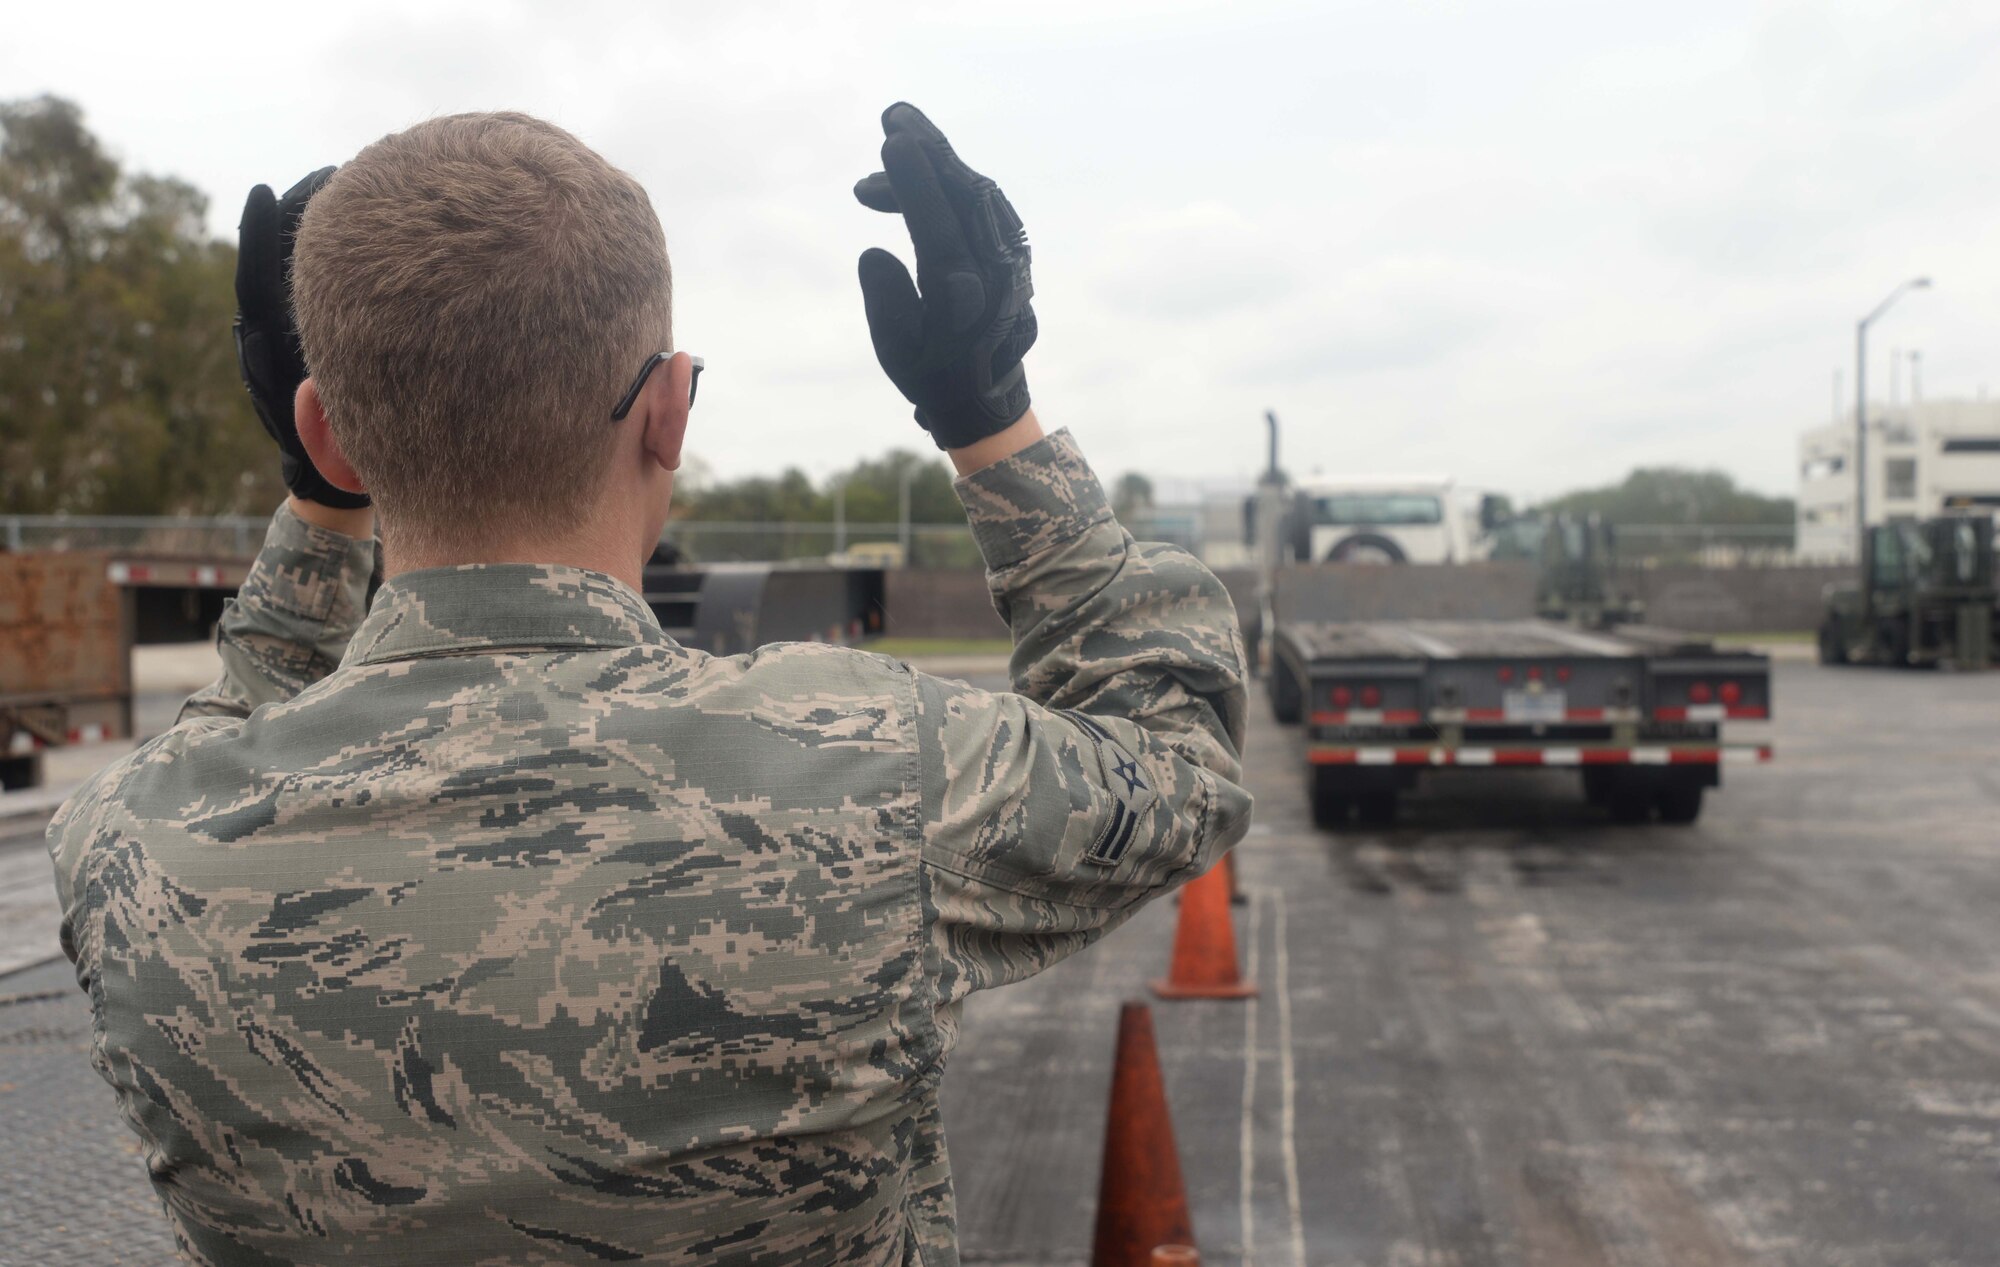 U.S Air Force Airman 1st Class Brandon Gray, a vehicle operator with the 6th Logistics Readiness Squadron, signals a tractor trailer on MacDill Air Force Base, Fla. Oct. 17, 2017.